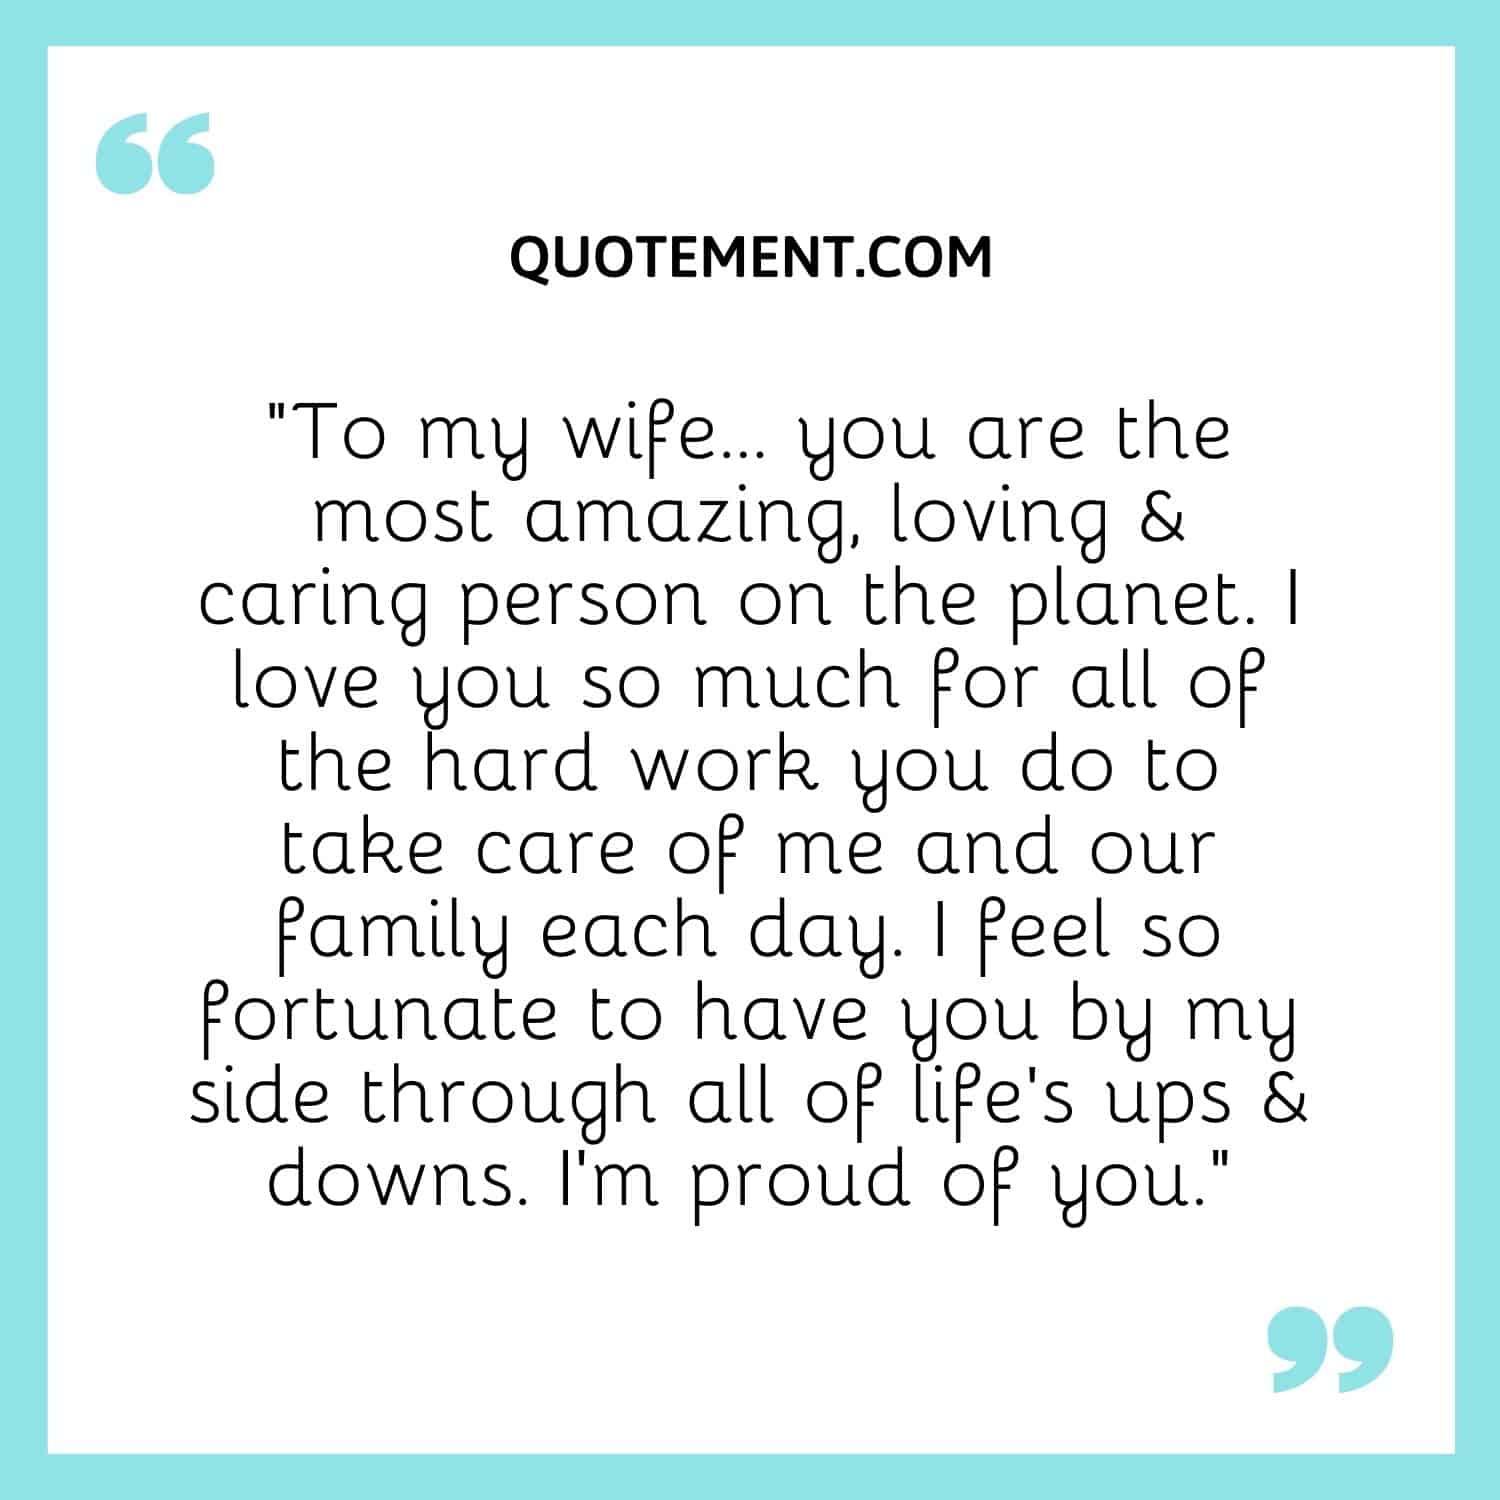 “To my wife… you are the most amazing, loving & caring person on the planet. I love you so much for all of the hard work you do to take care of me and our family each day.